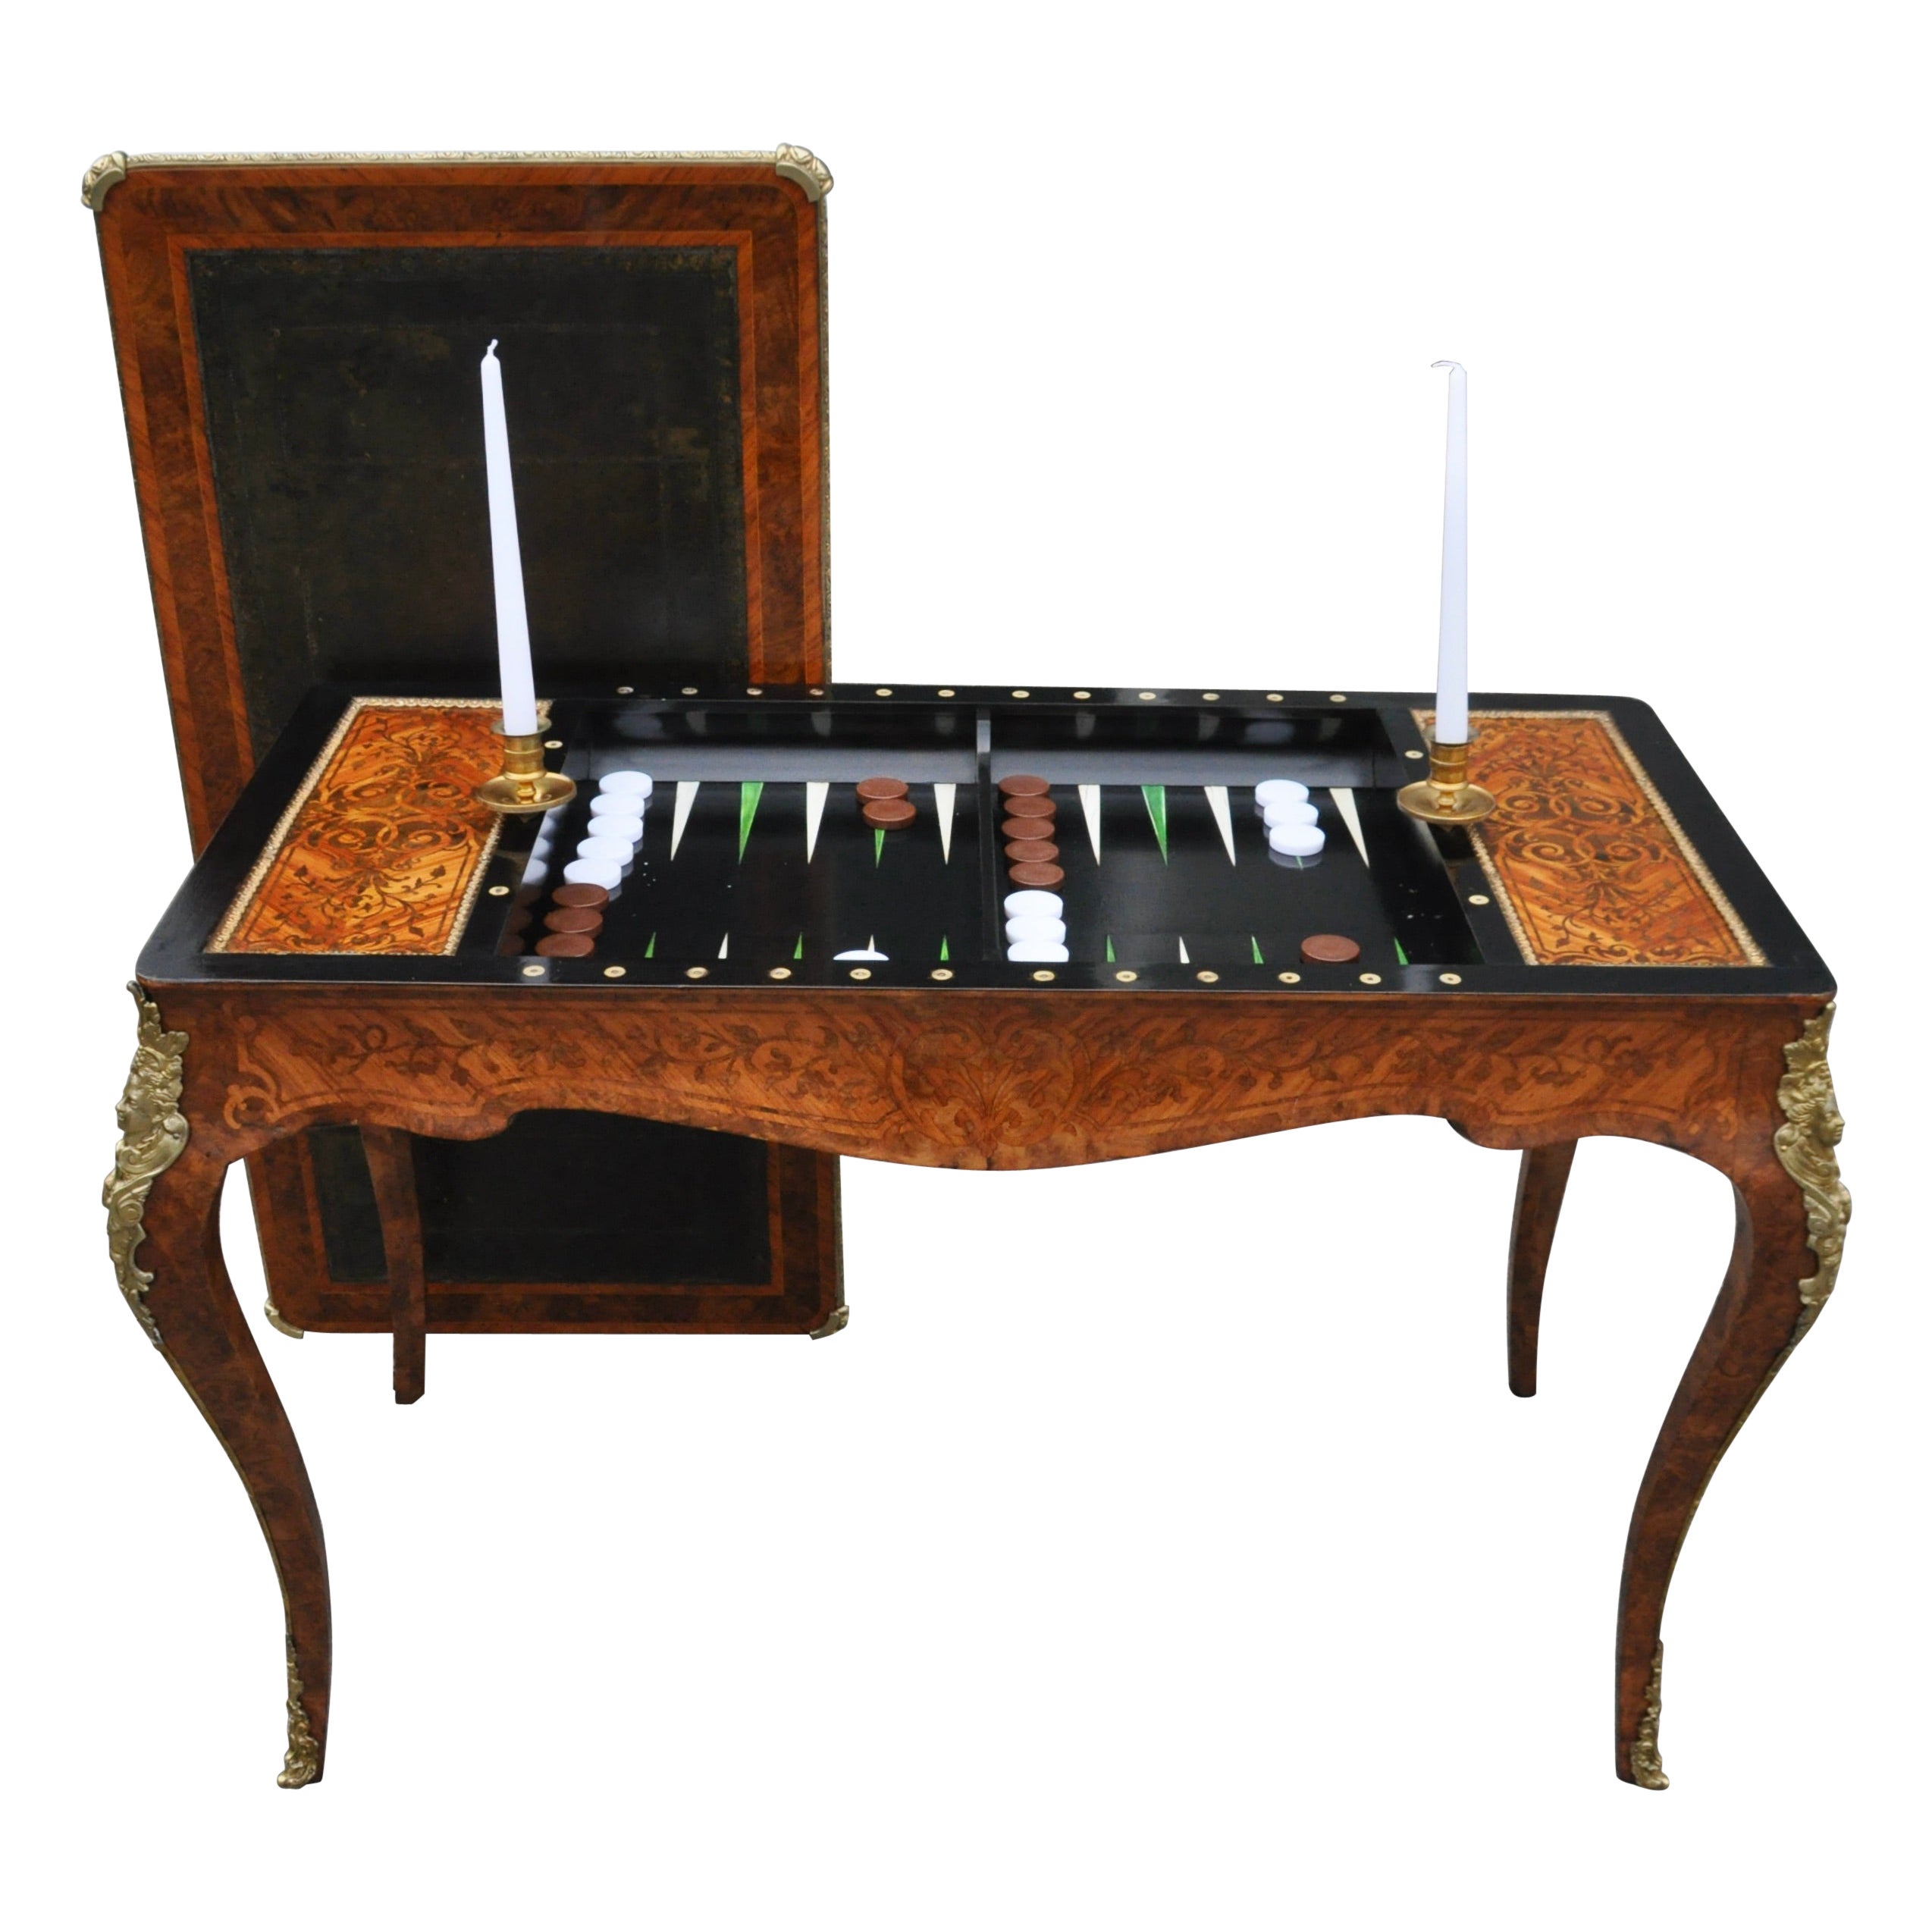 19th Century French Kingwood Regence Style Tric-Trac Games Table For Sale